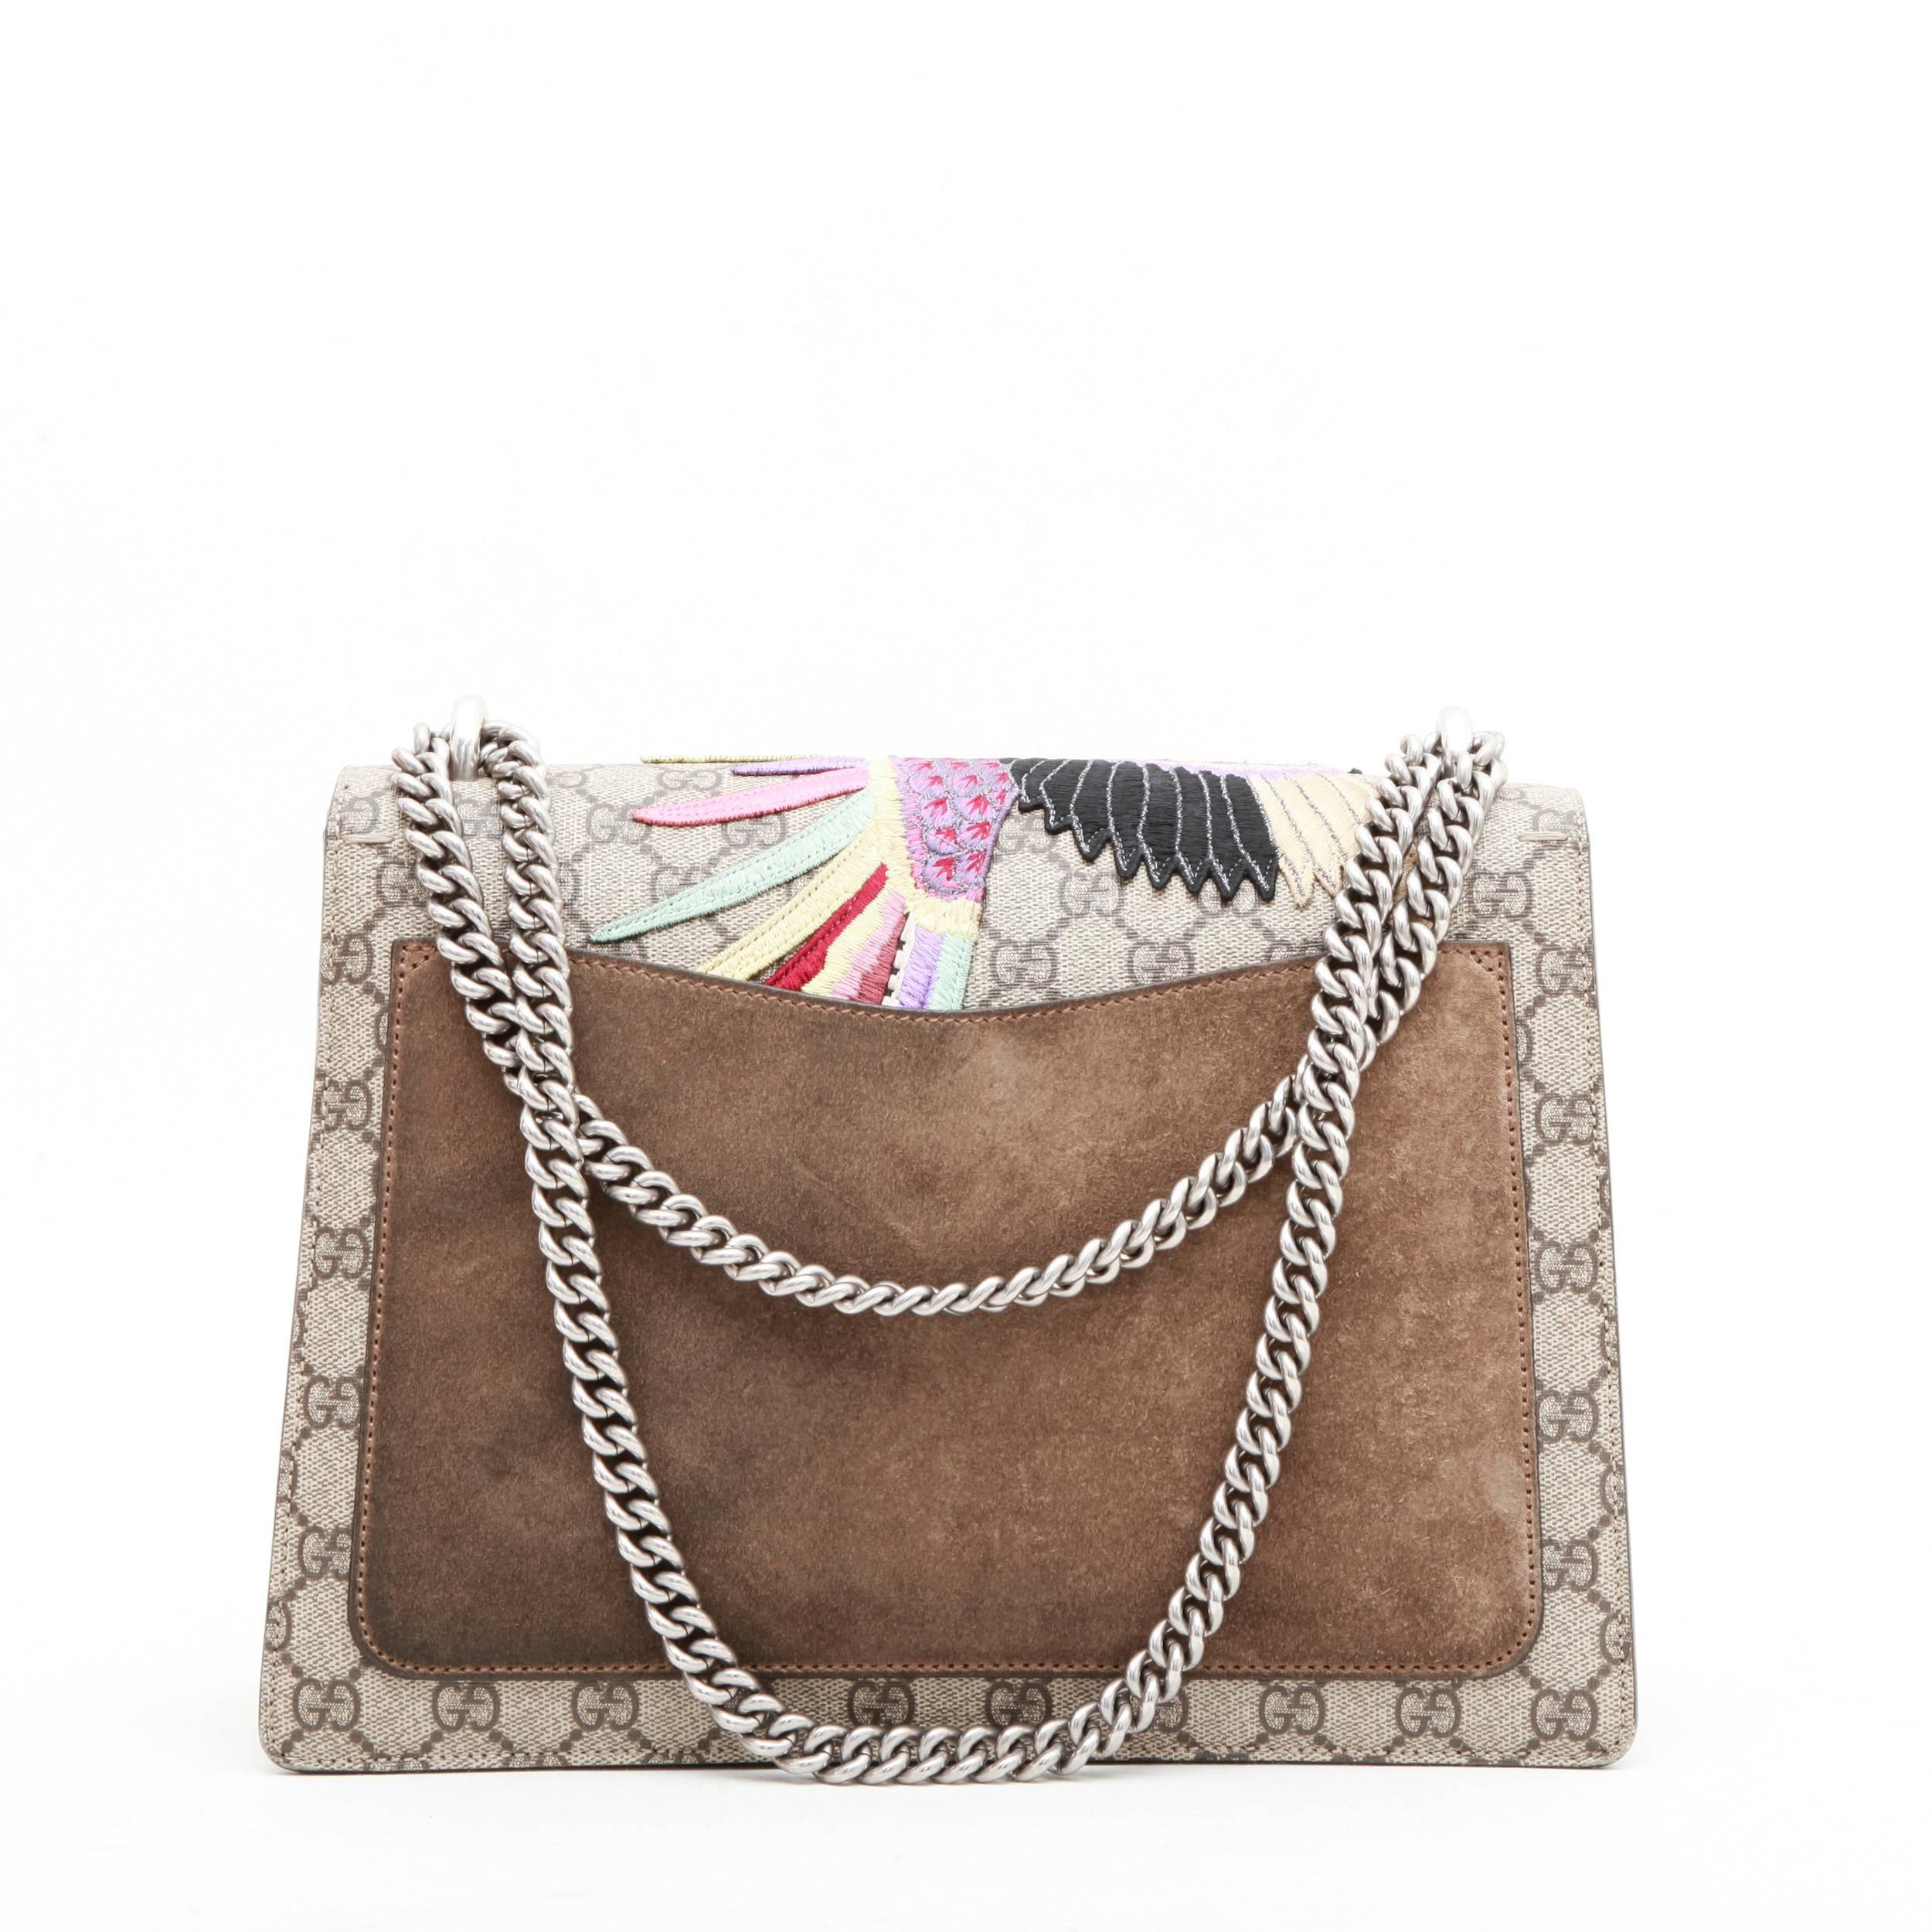 Gray GUCCI Dionysus Flap Bag in GG Supreme Canvas with Suede and Embroideries